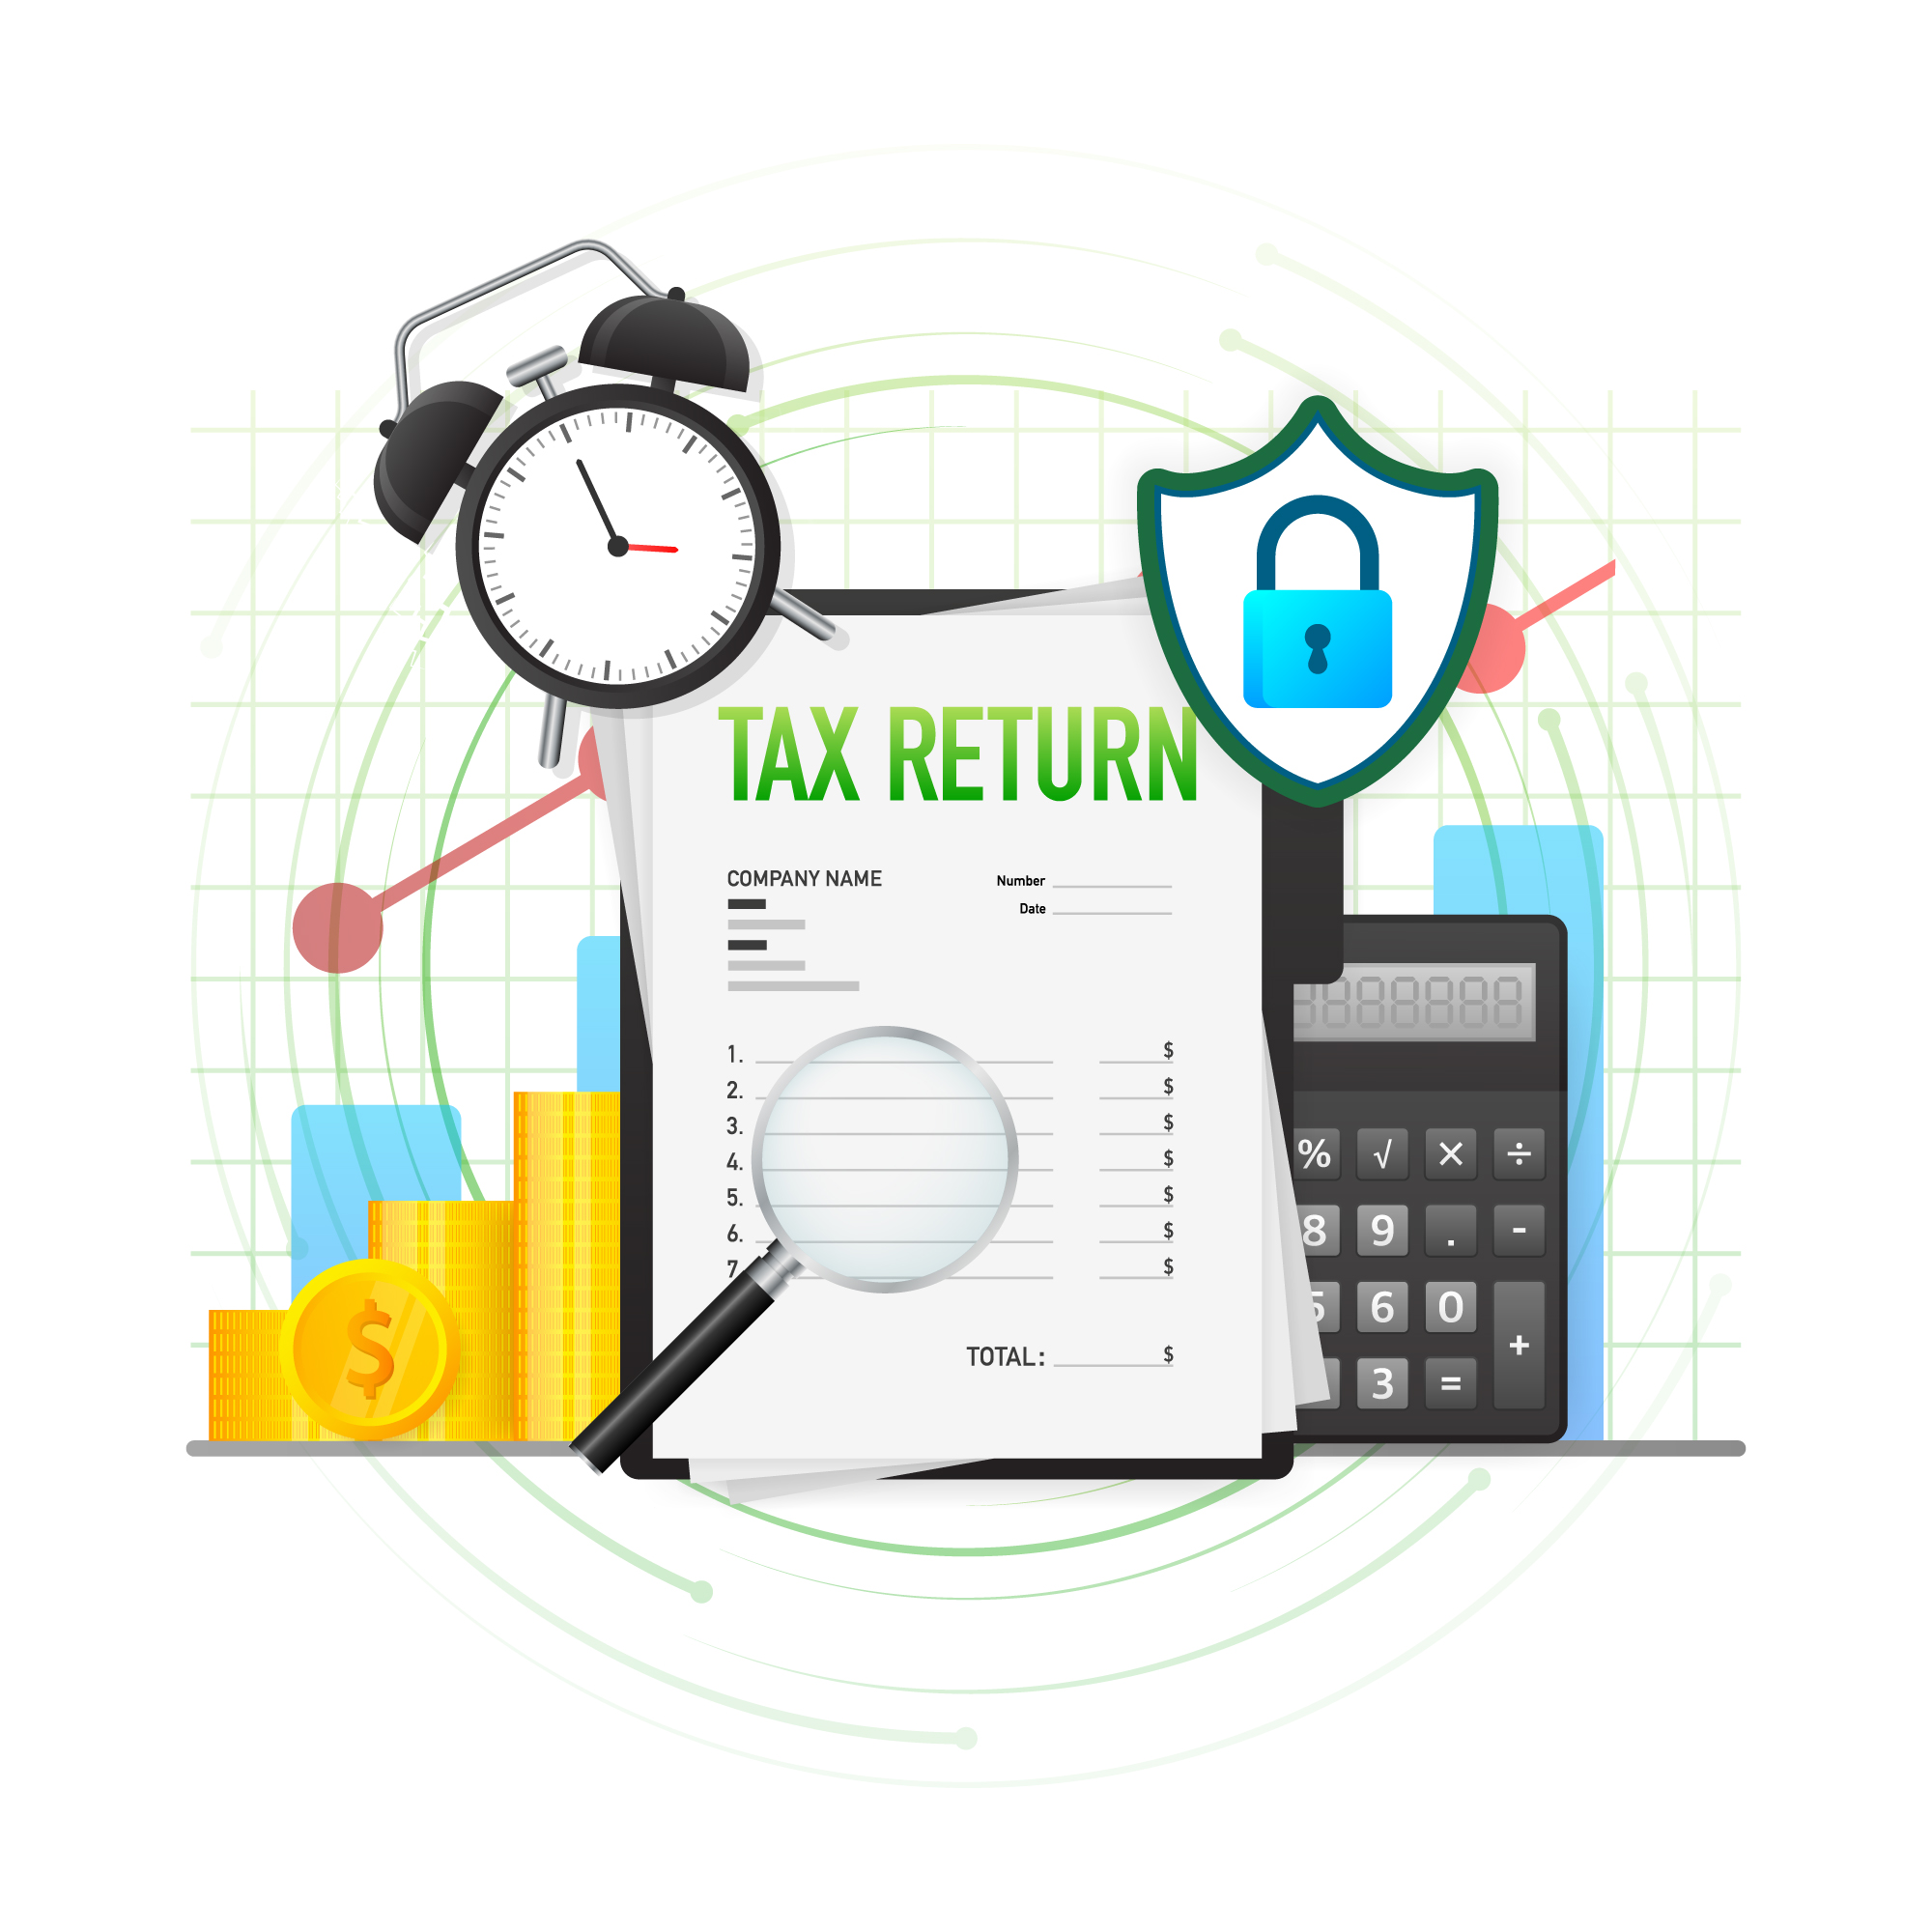 Is Filing Your Tax Return Online Secure